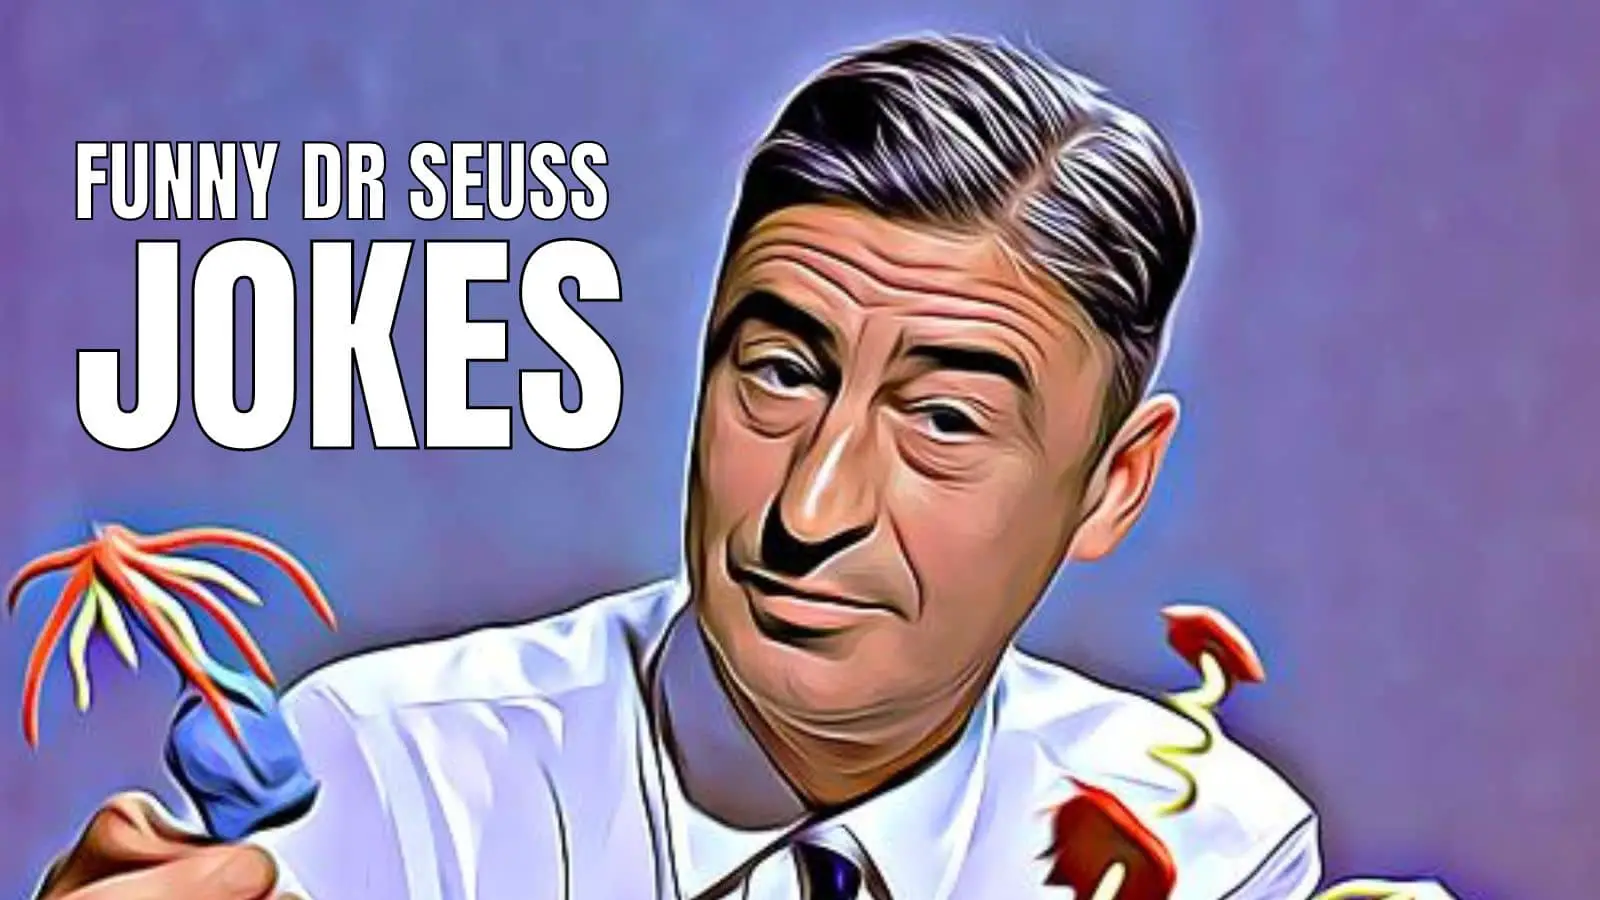 30 Funny Dr. Seuss Jokes To Discover The Whimsical World